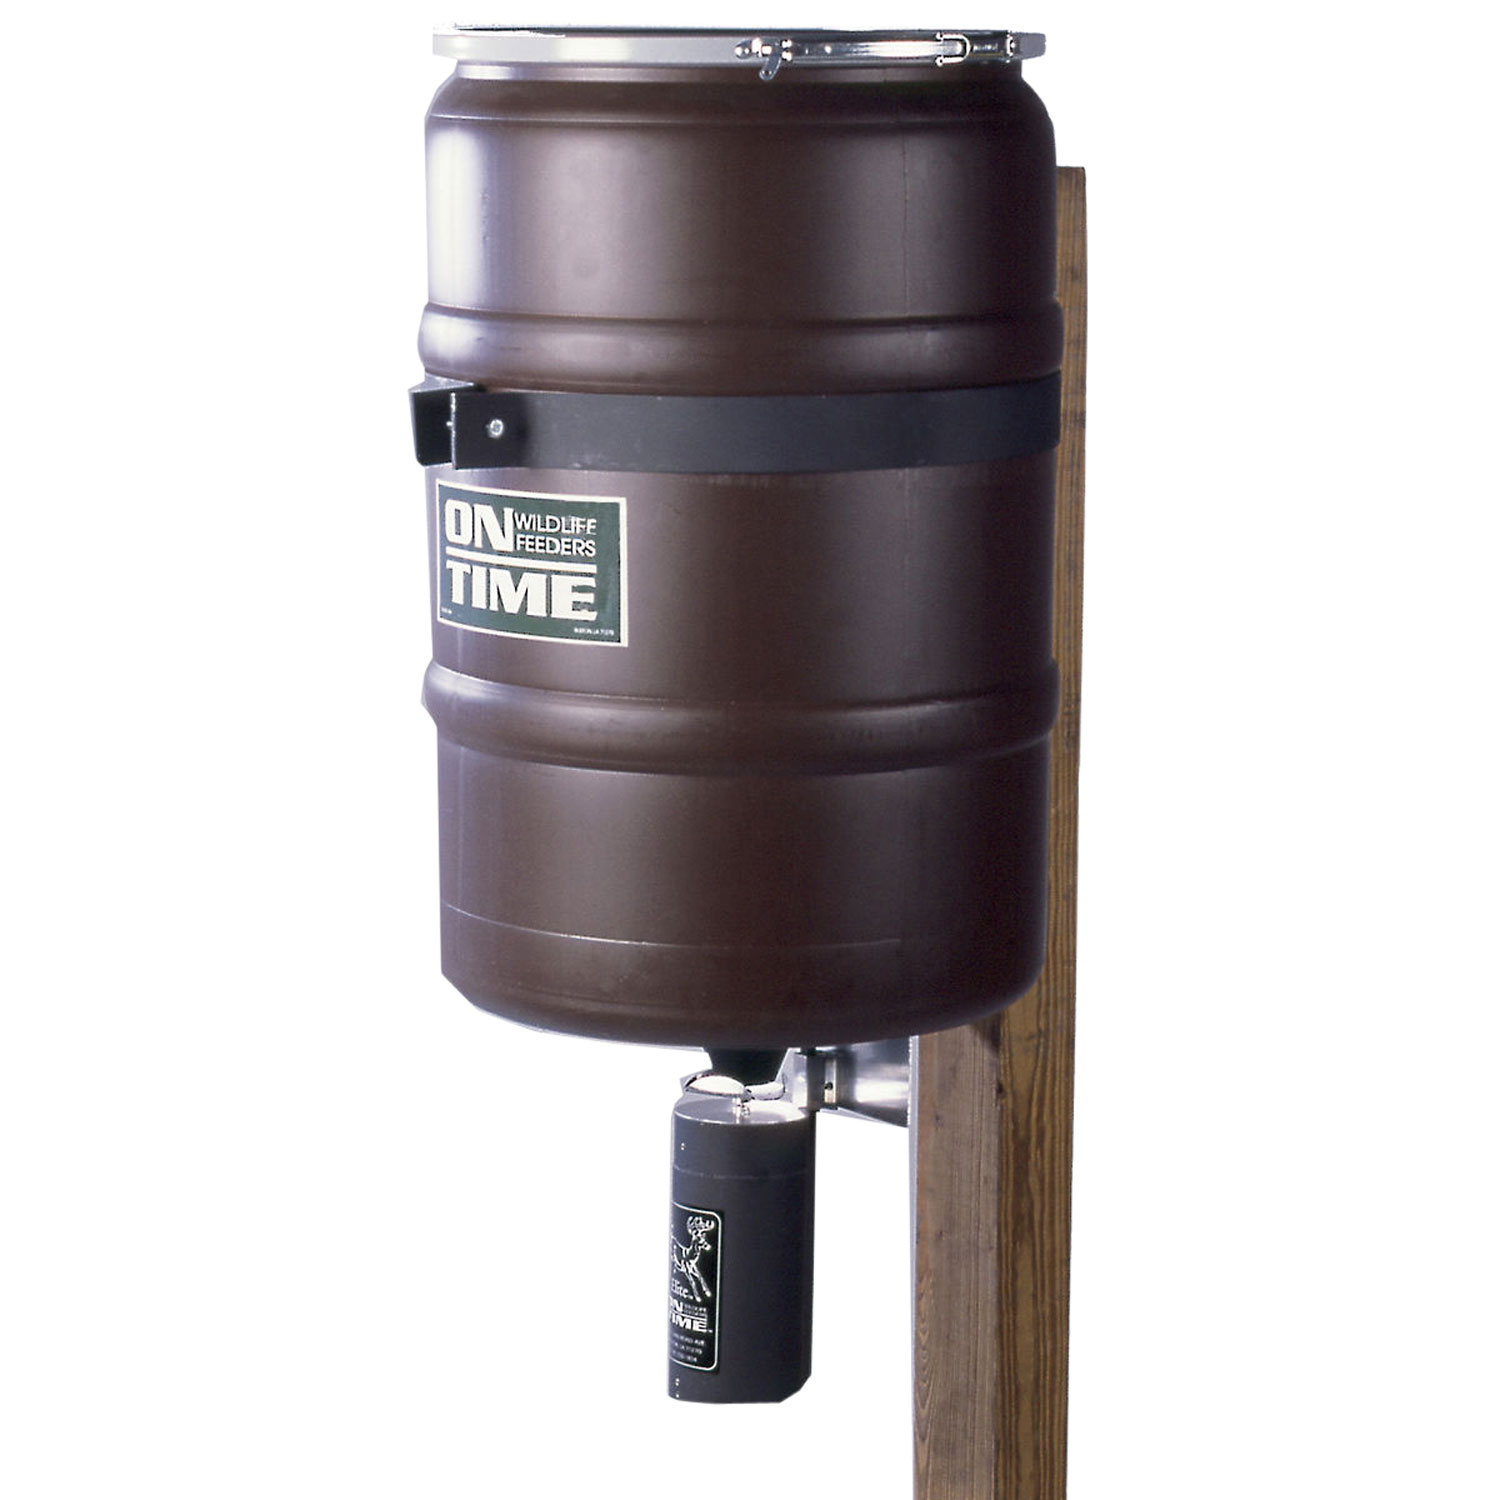 On Time 50003 Elite Lifetime Fish Feeder Combo with 25 Gallon Capacity, Black Finish, Built-In Agitator Rod & Steel Band with Welded Bracket